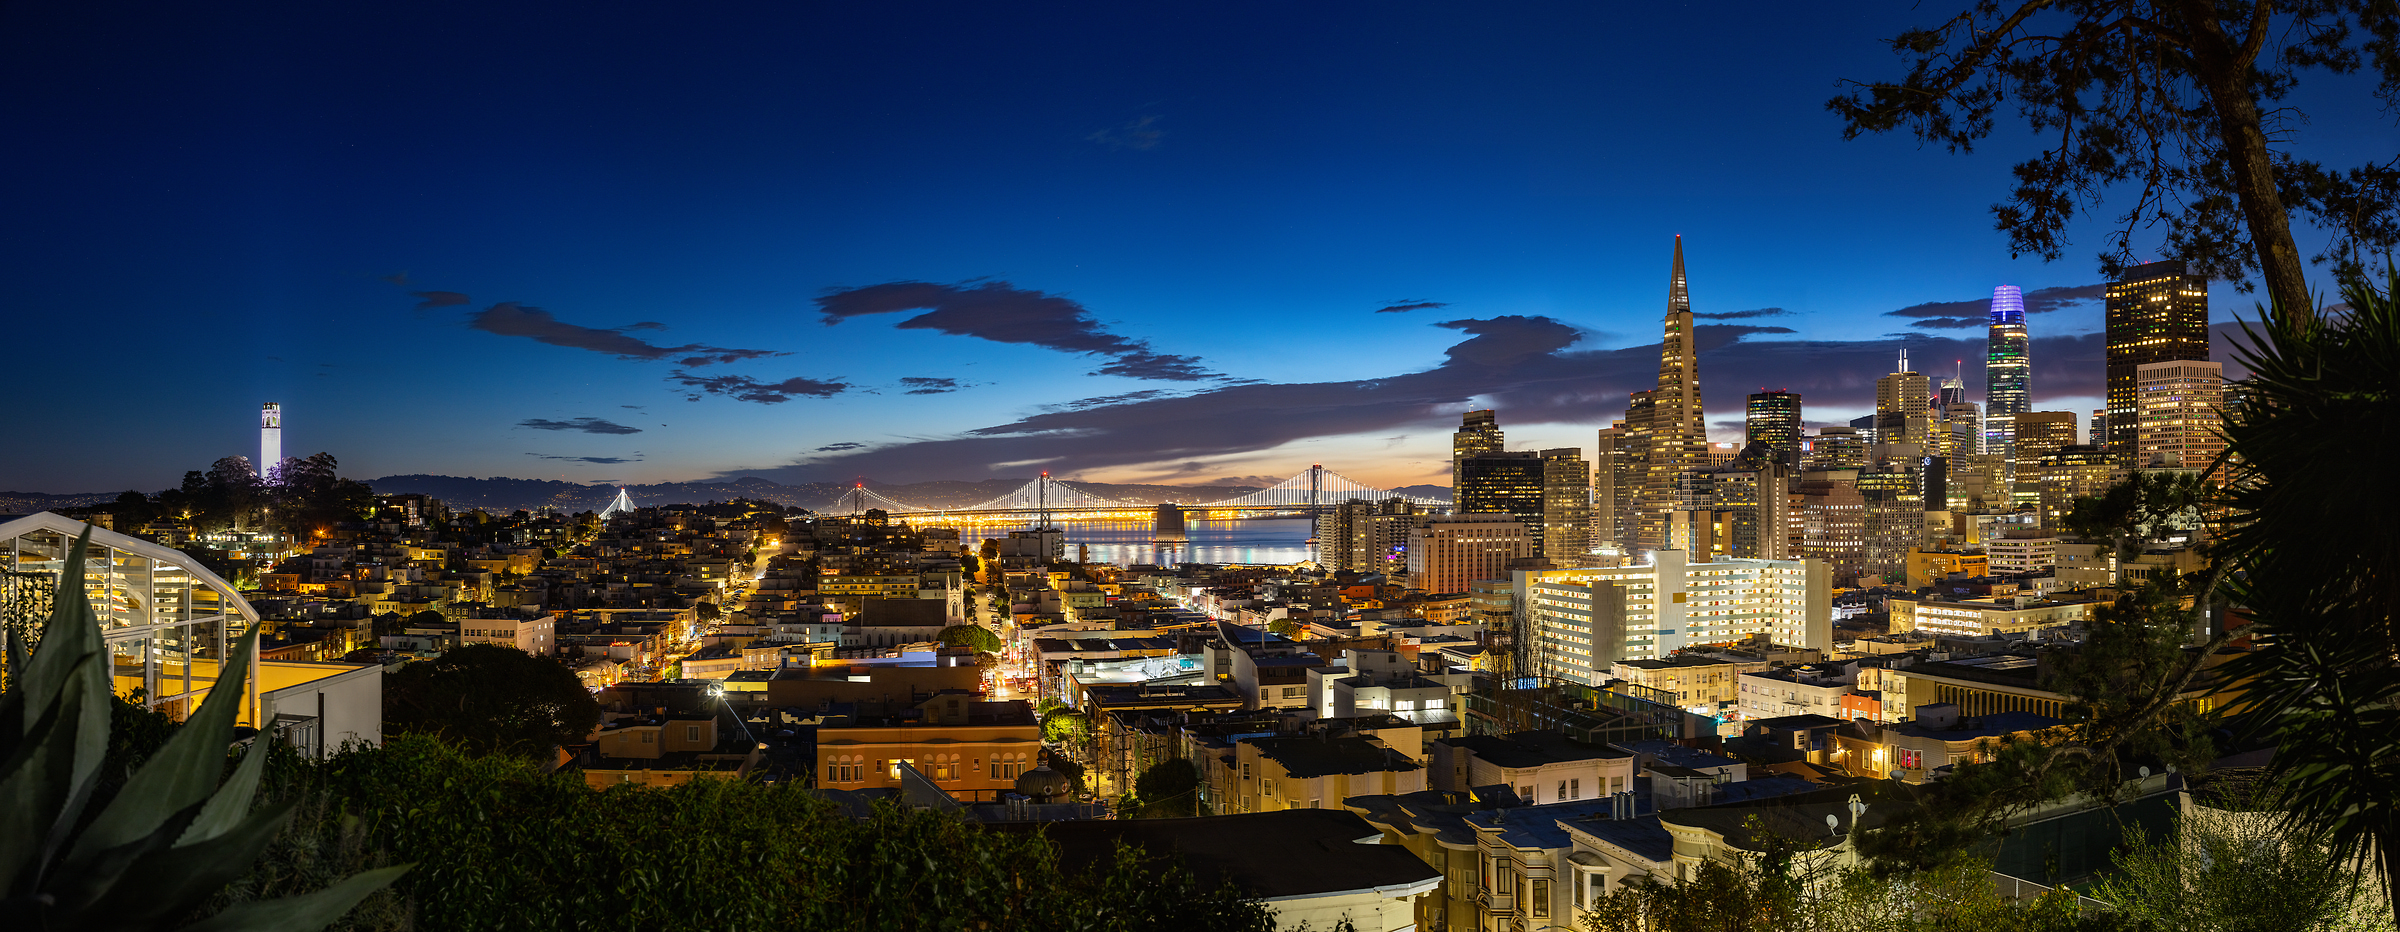 730 megapixels! A very high resolution, large-format VAST photo print of North Beach in San Francisco; cityscape photograph created by Nicholas Gonzales in Ina Coolbrith Park, San Francisco, California.